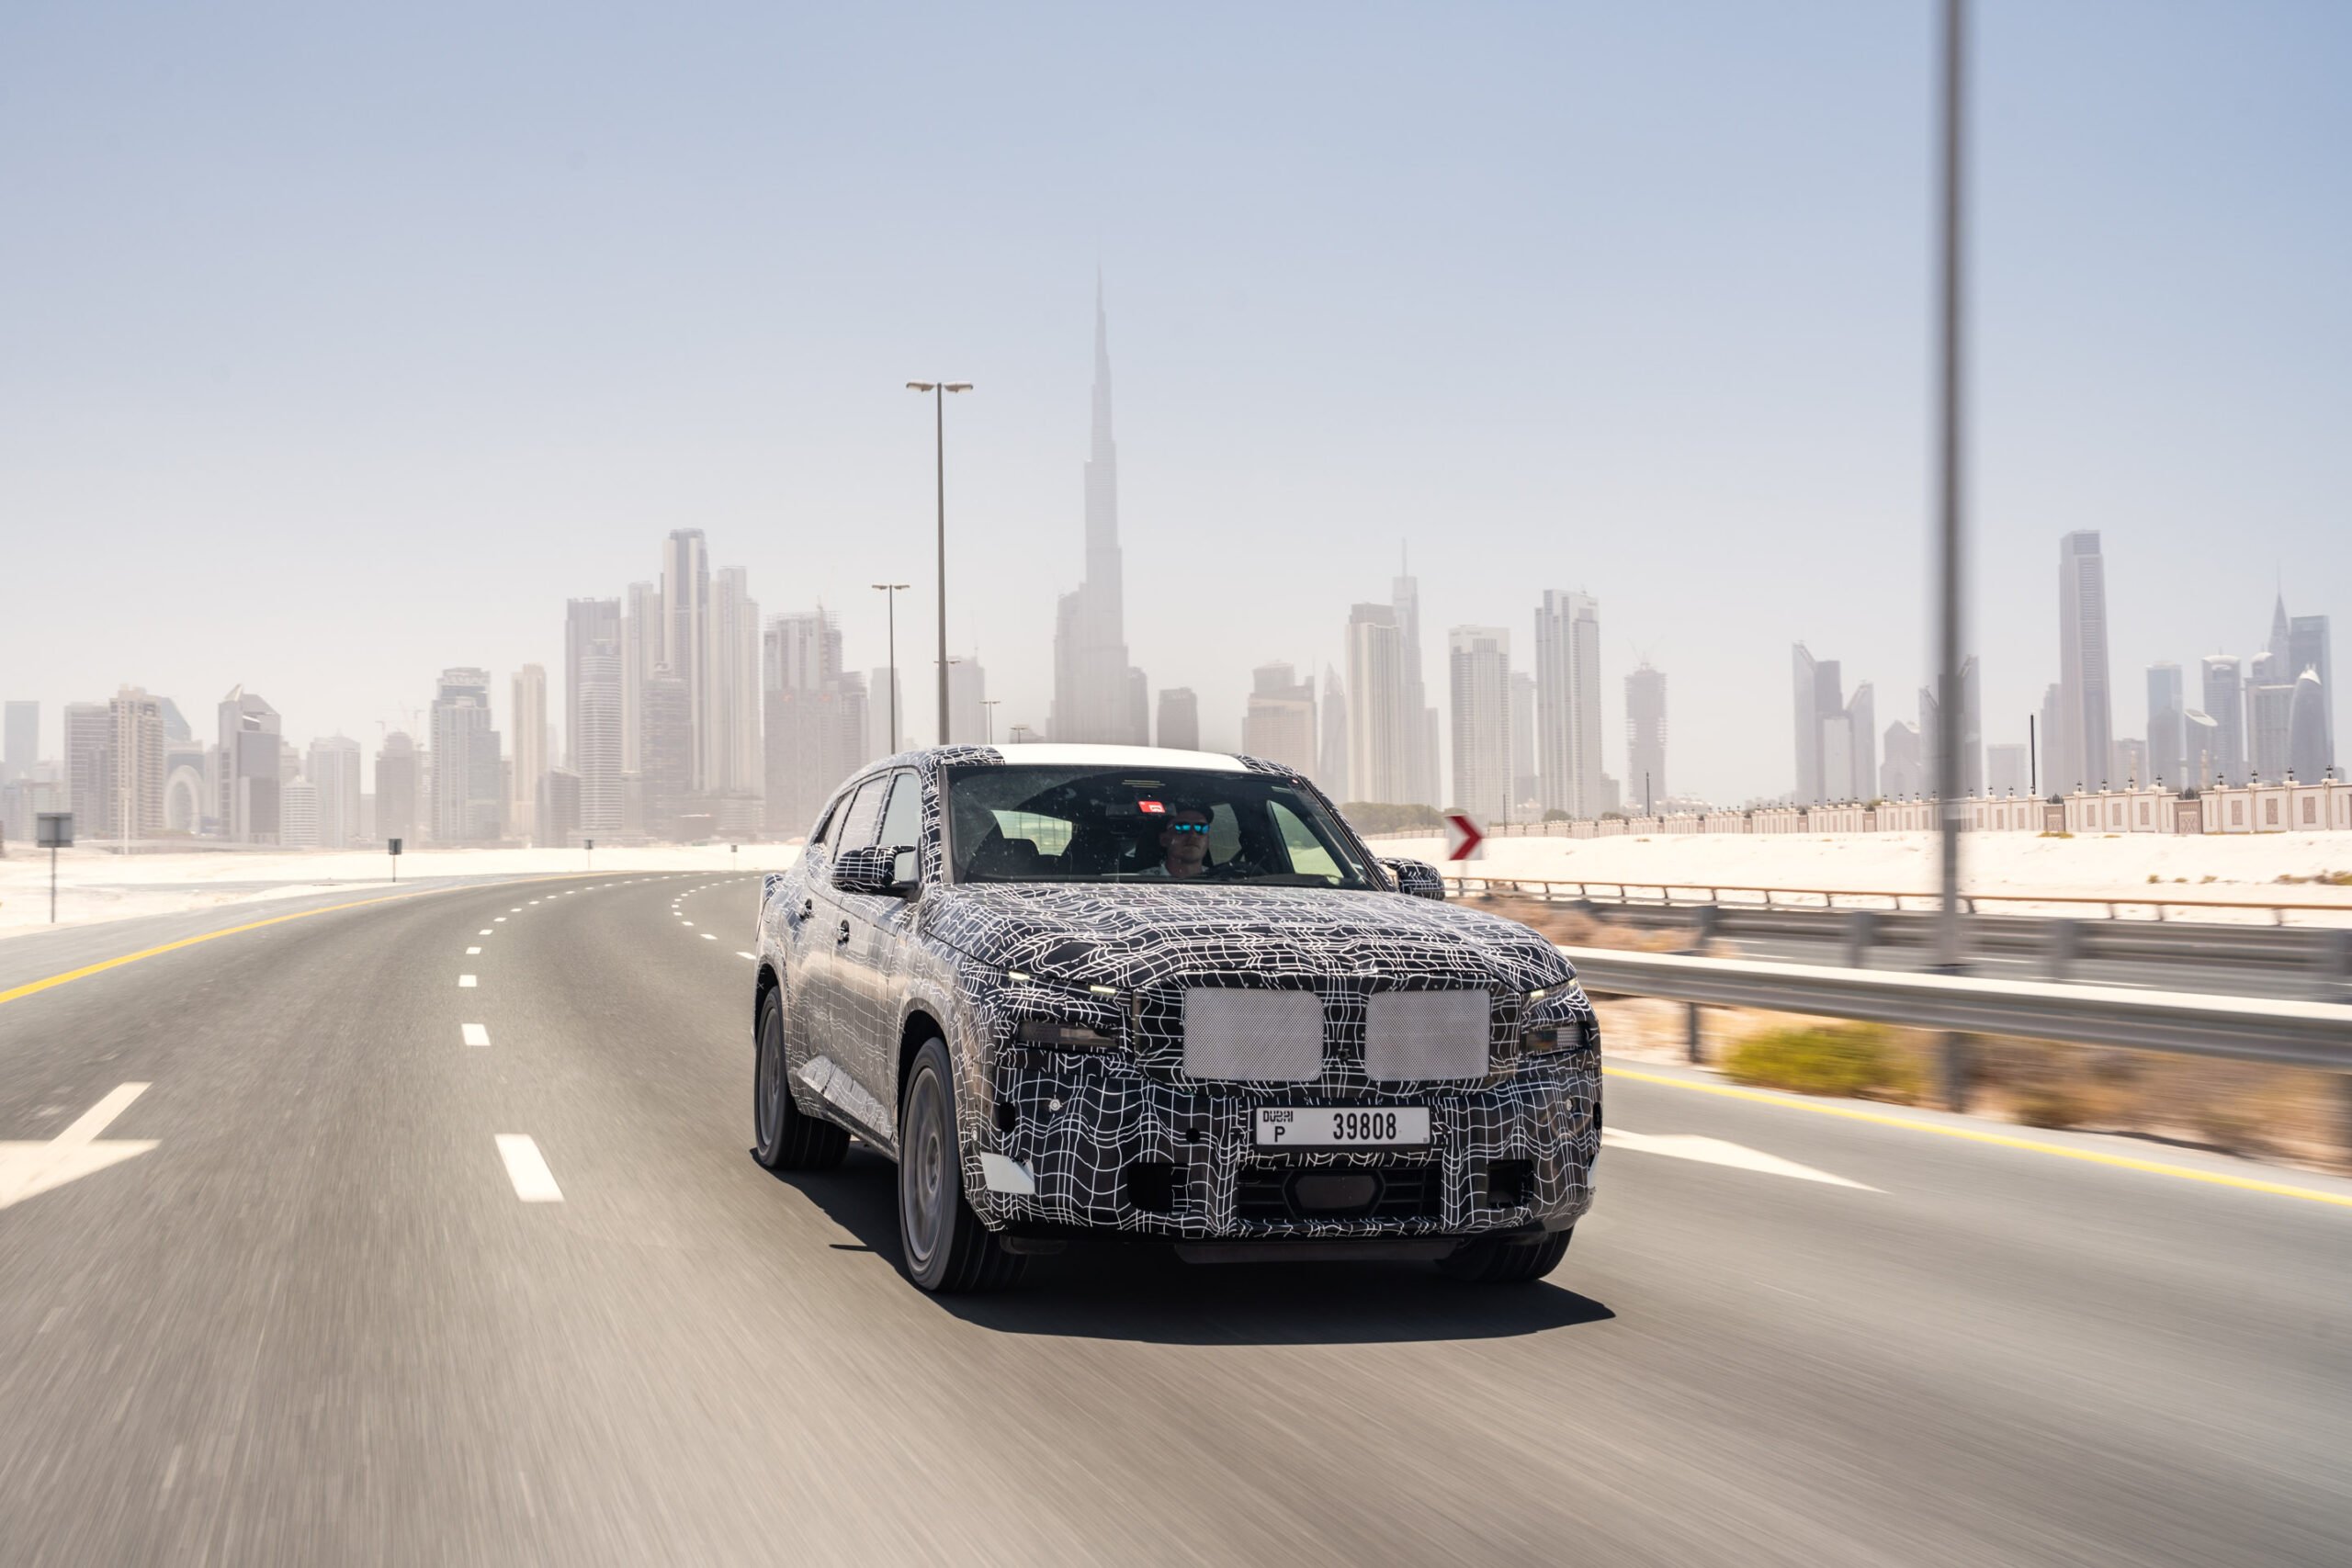 The Middle East provides the perfect high-temperature testing ground for revolutionary BMW XM